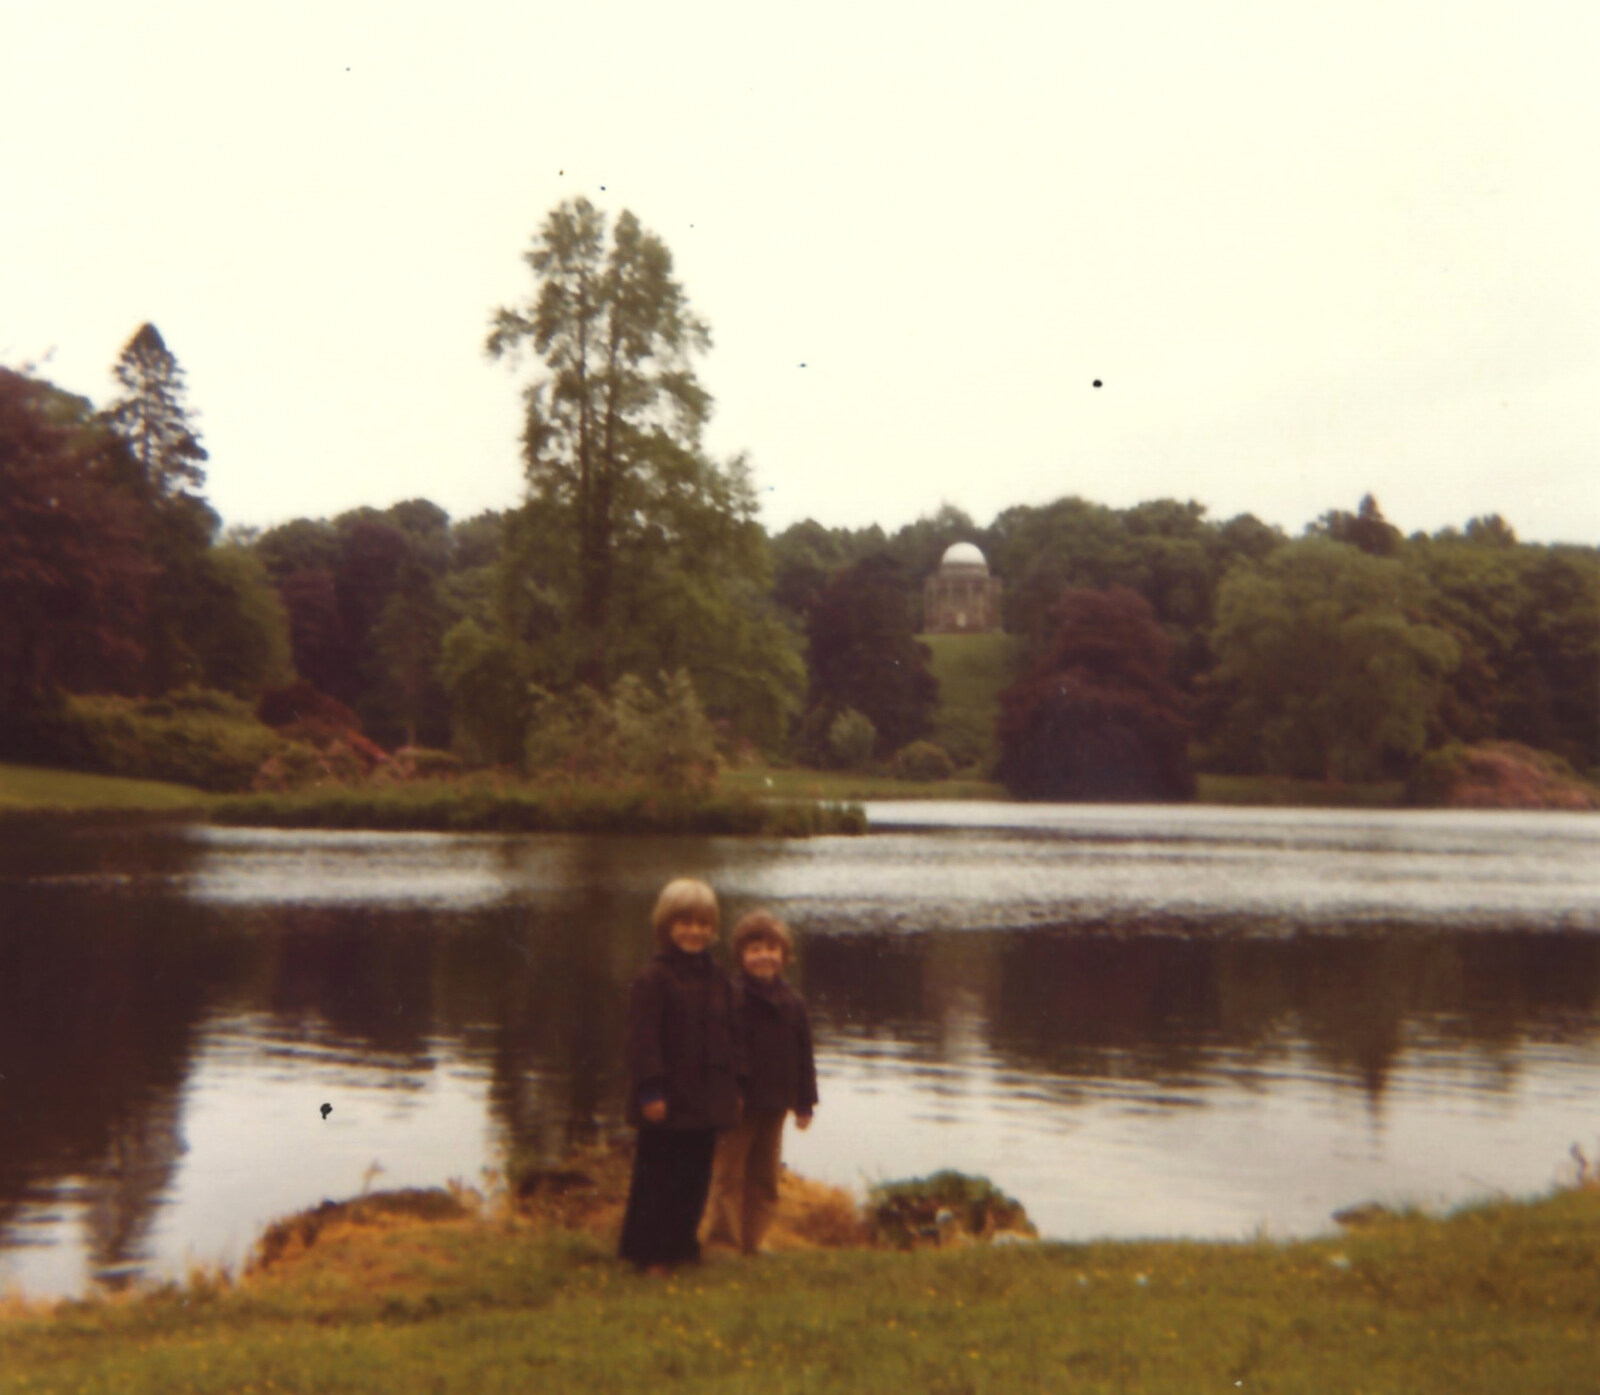 Family History: The 1970s, Timperley and Sandbach, Cheshire - 24th January 2020: Nosher and Sis by a lake